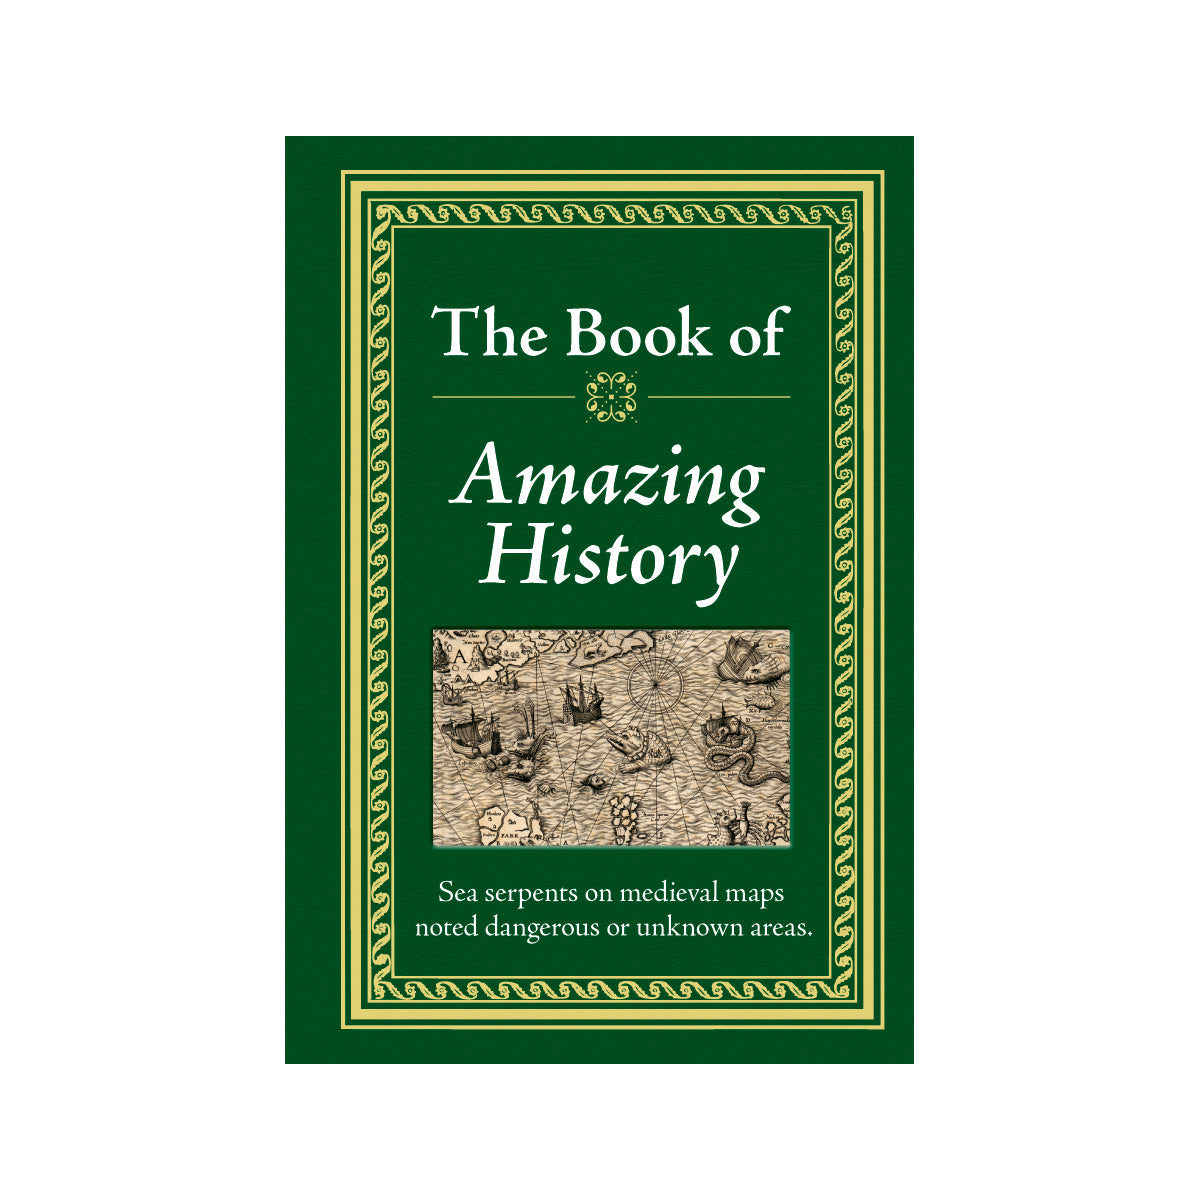 The Book of Amazing History